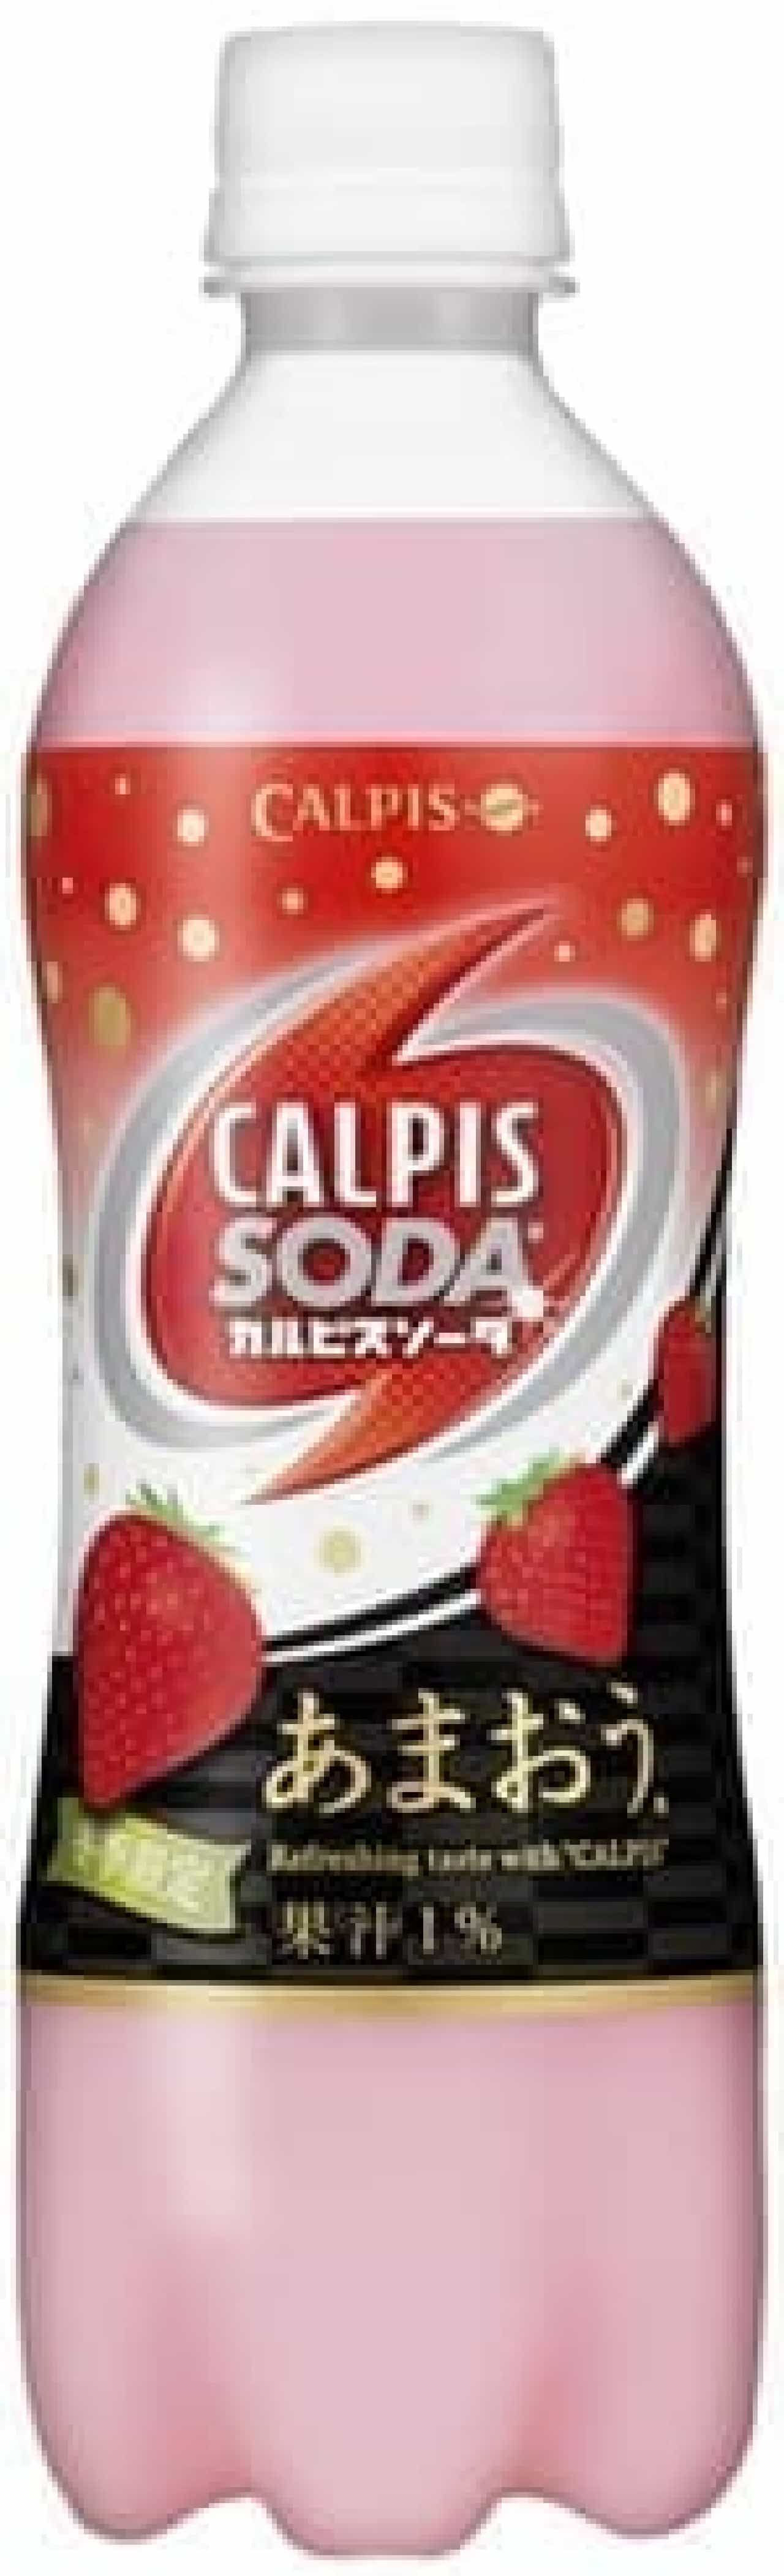 Enjoy the rich, sweet and sour strawberry flavor!